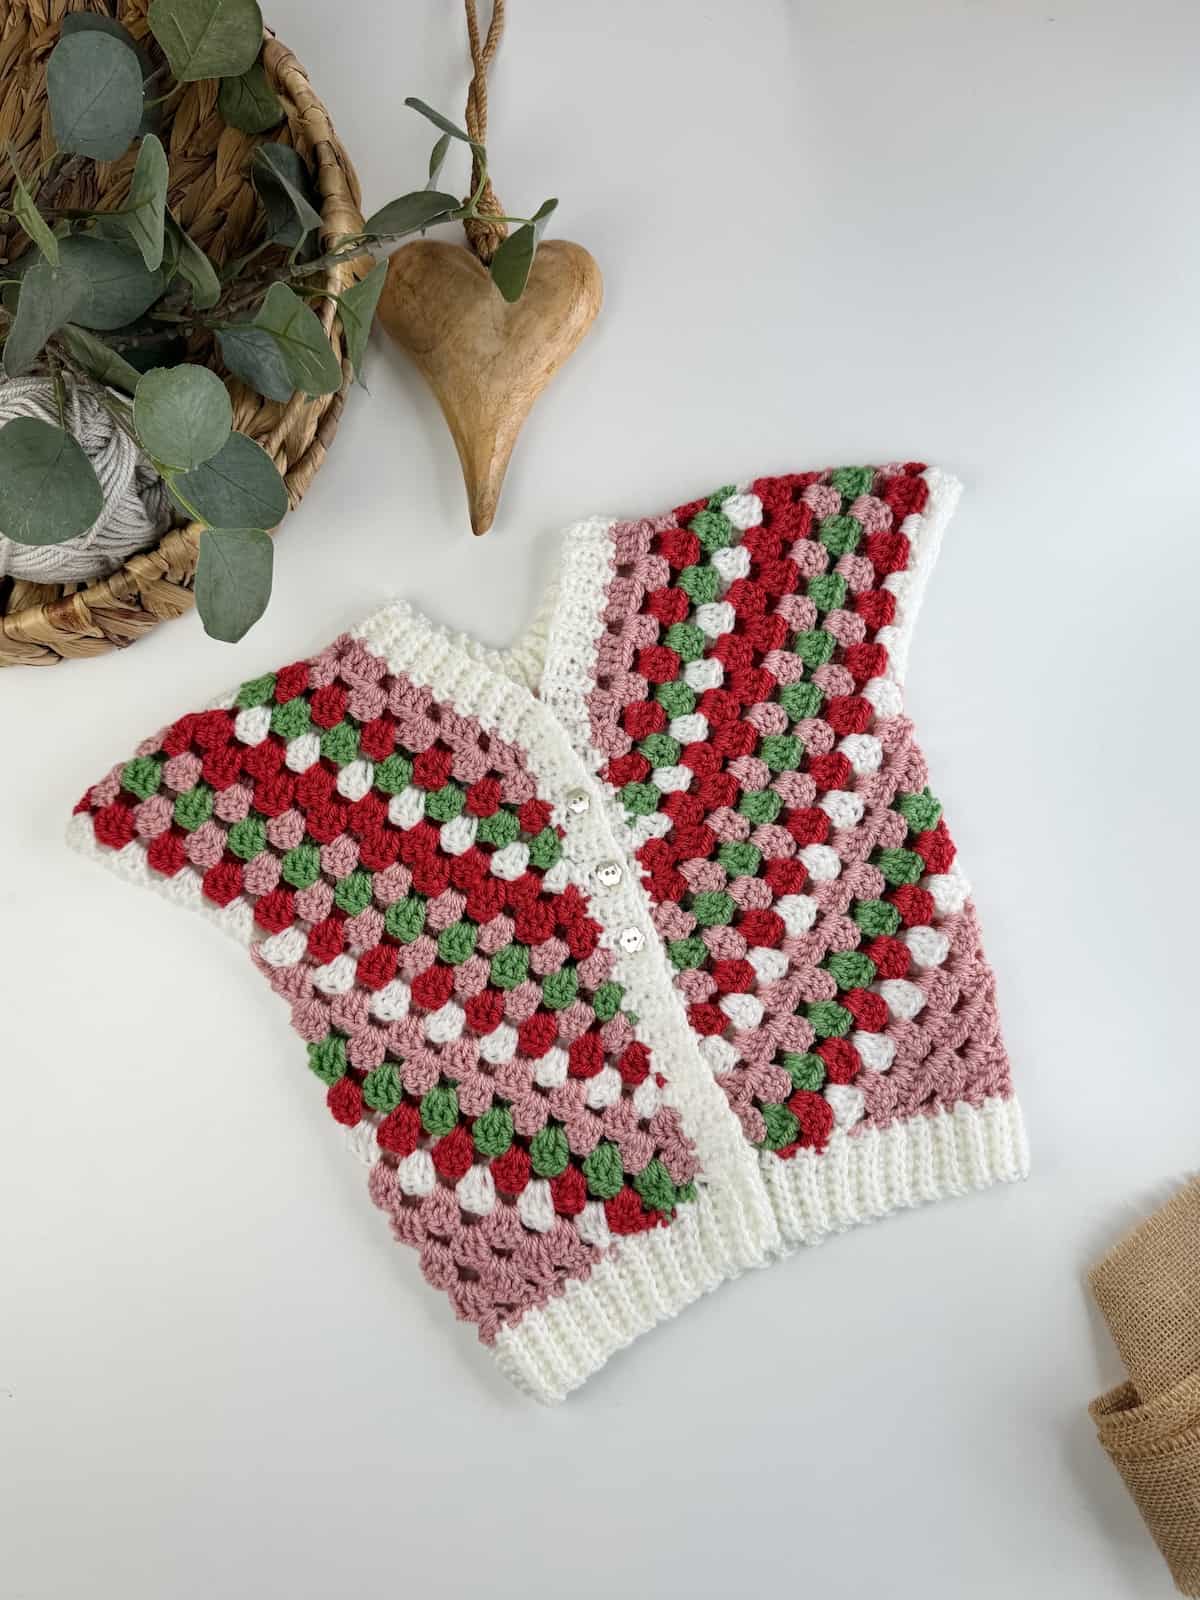 A sleeveless crocheted cardigan for toddlers with red, green and white stripes.